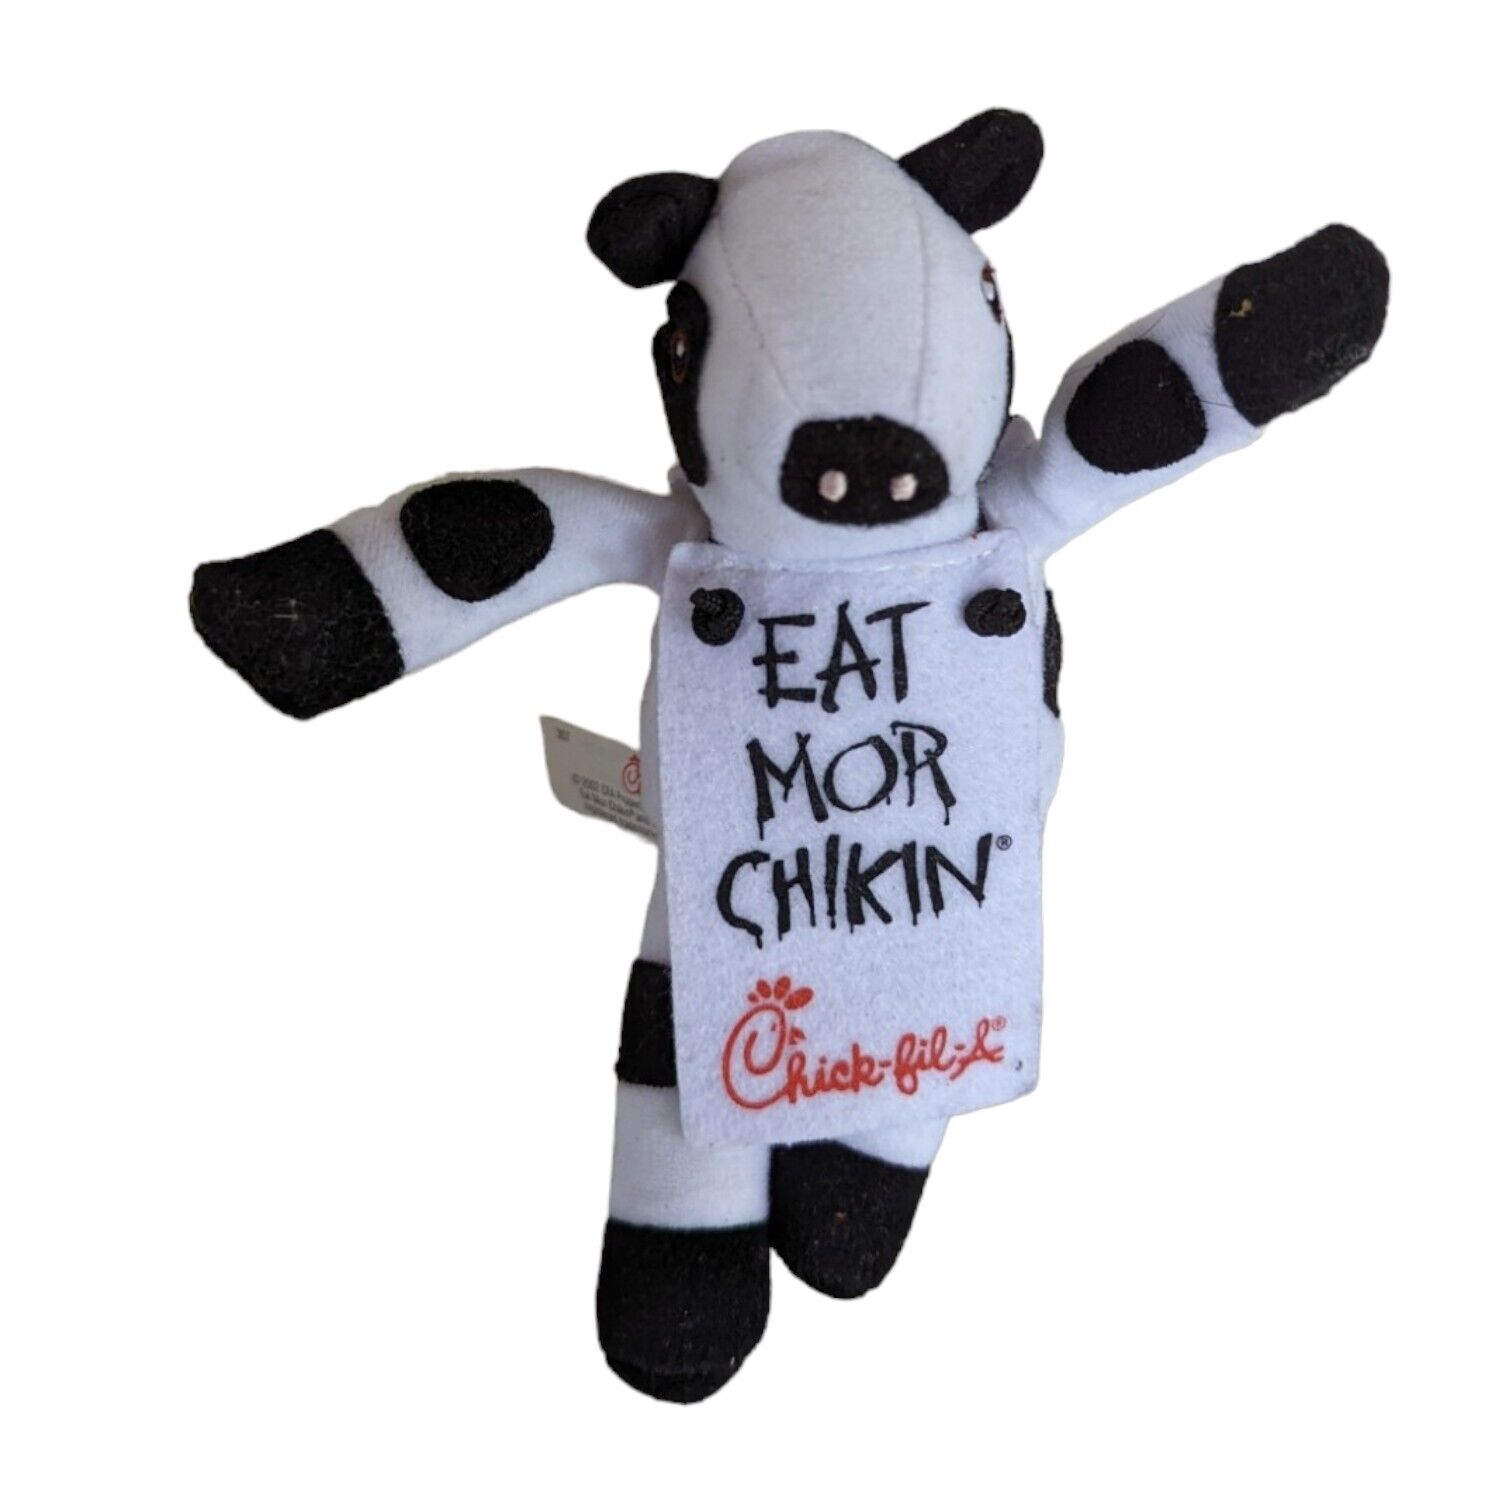 Chick-Fil-A Eat More Chikin Cow Plush Stuffed Animal Toy Vintage 2002 6” Tall